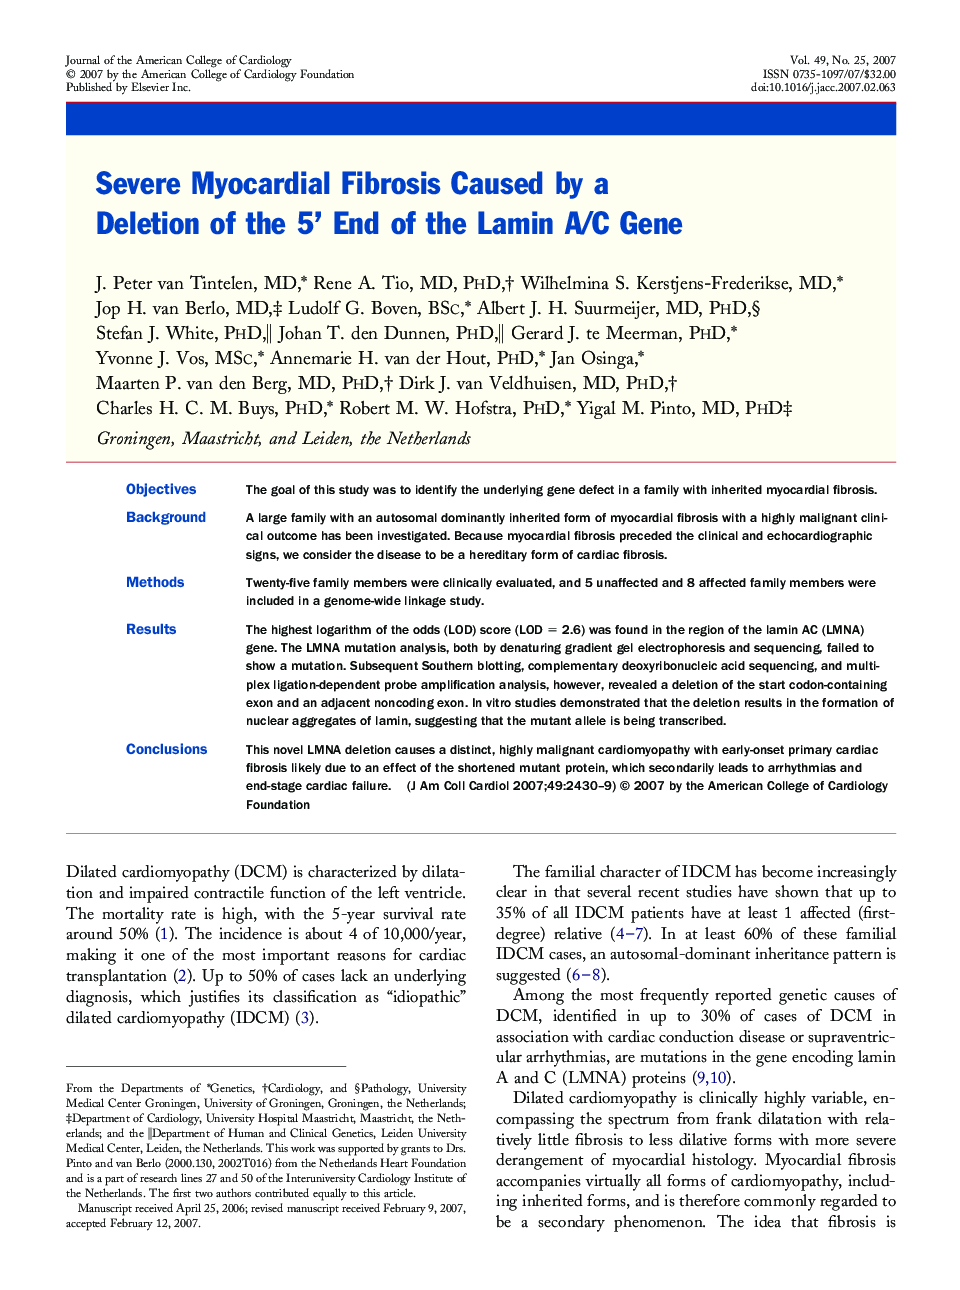 Severe Myocardial Fibrosis Caused by a Deletion of the 5’ End of the Lamin A/C Gene 